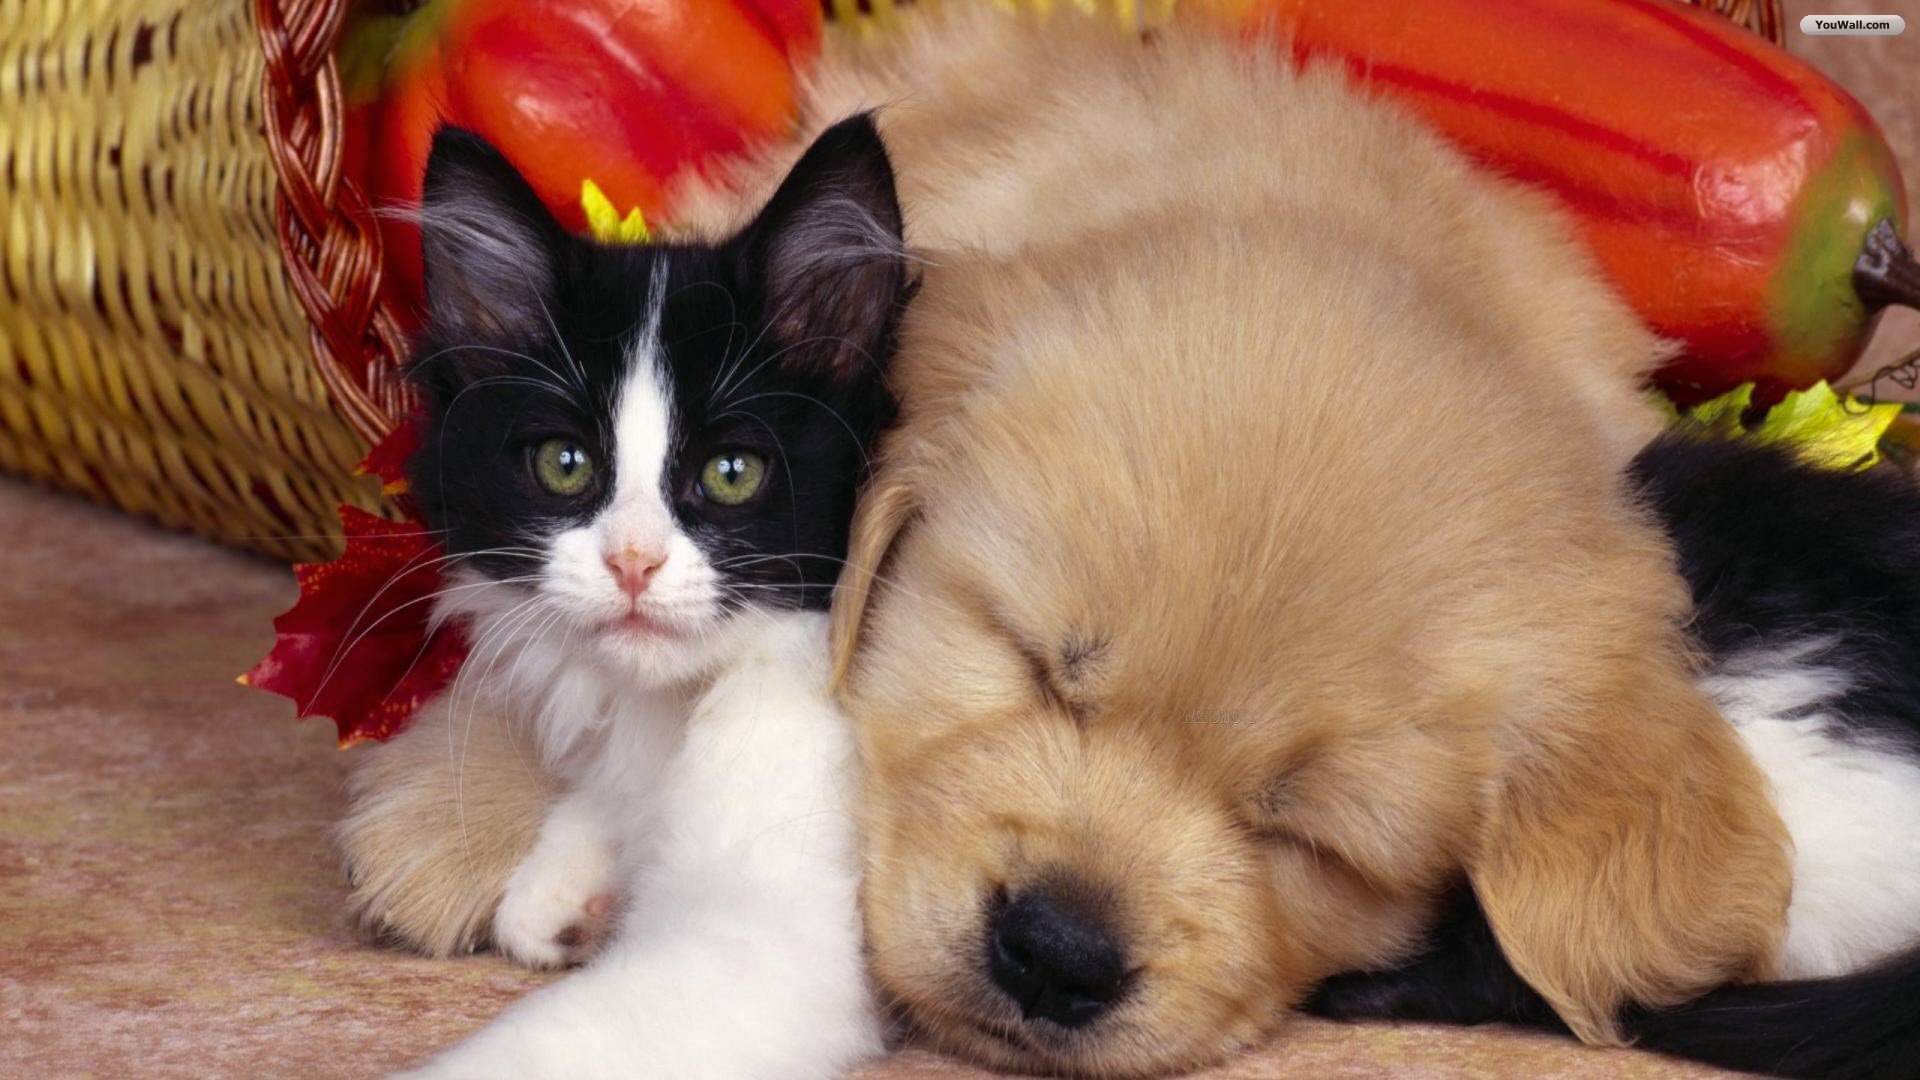 Cute Pictures Of Dogs And Cats